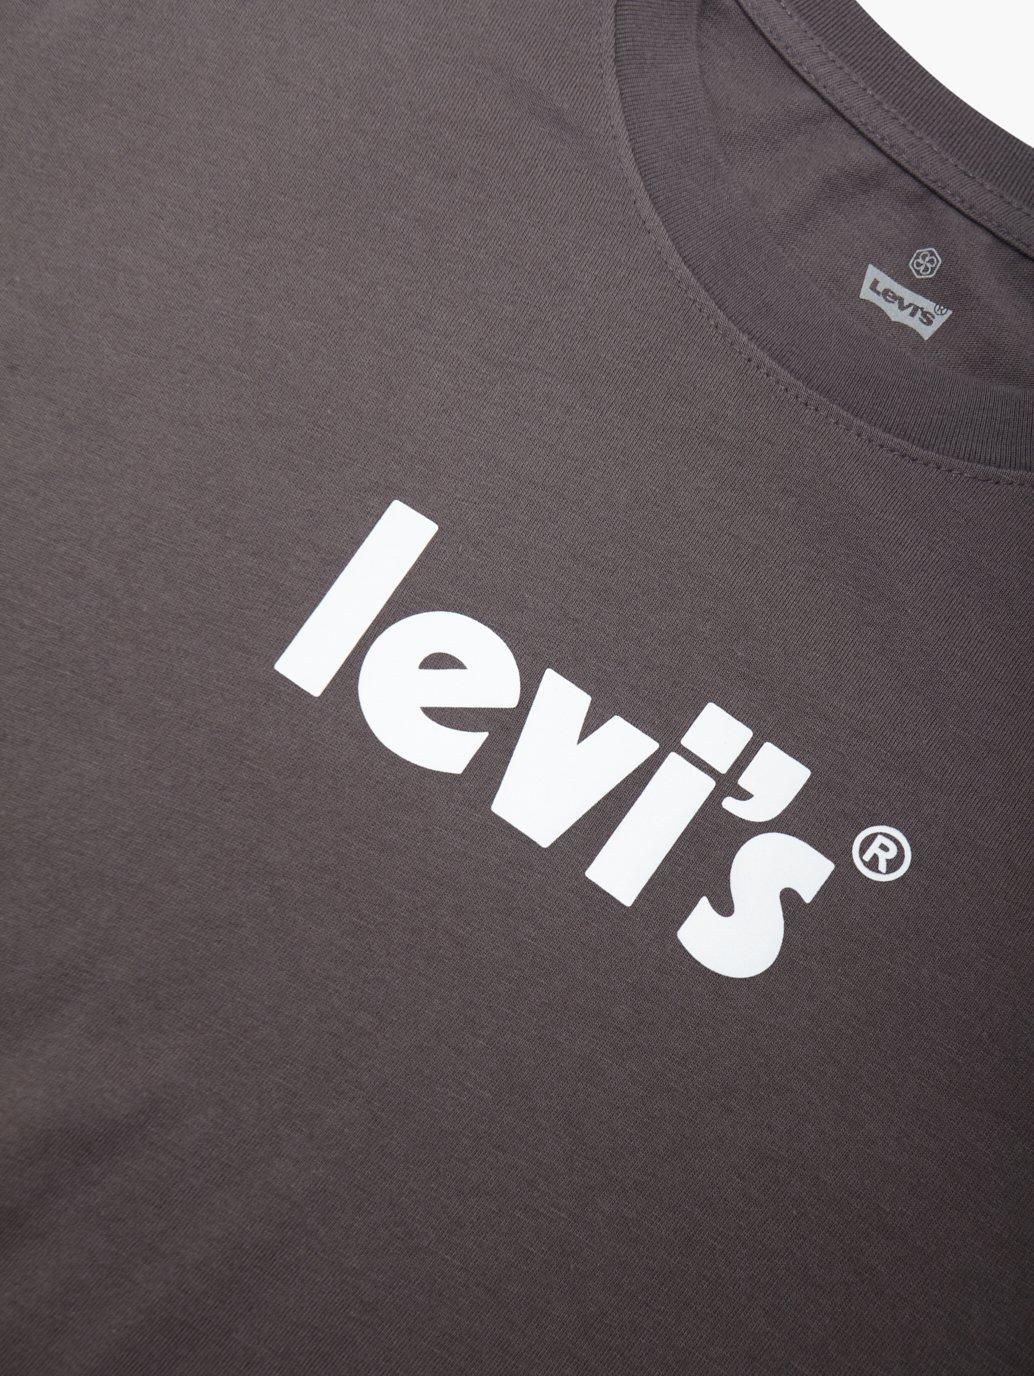 levis malaysia mens relaxed fit short sleeve t shirt 161430558 16 Details